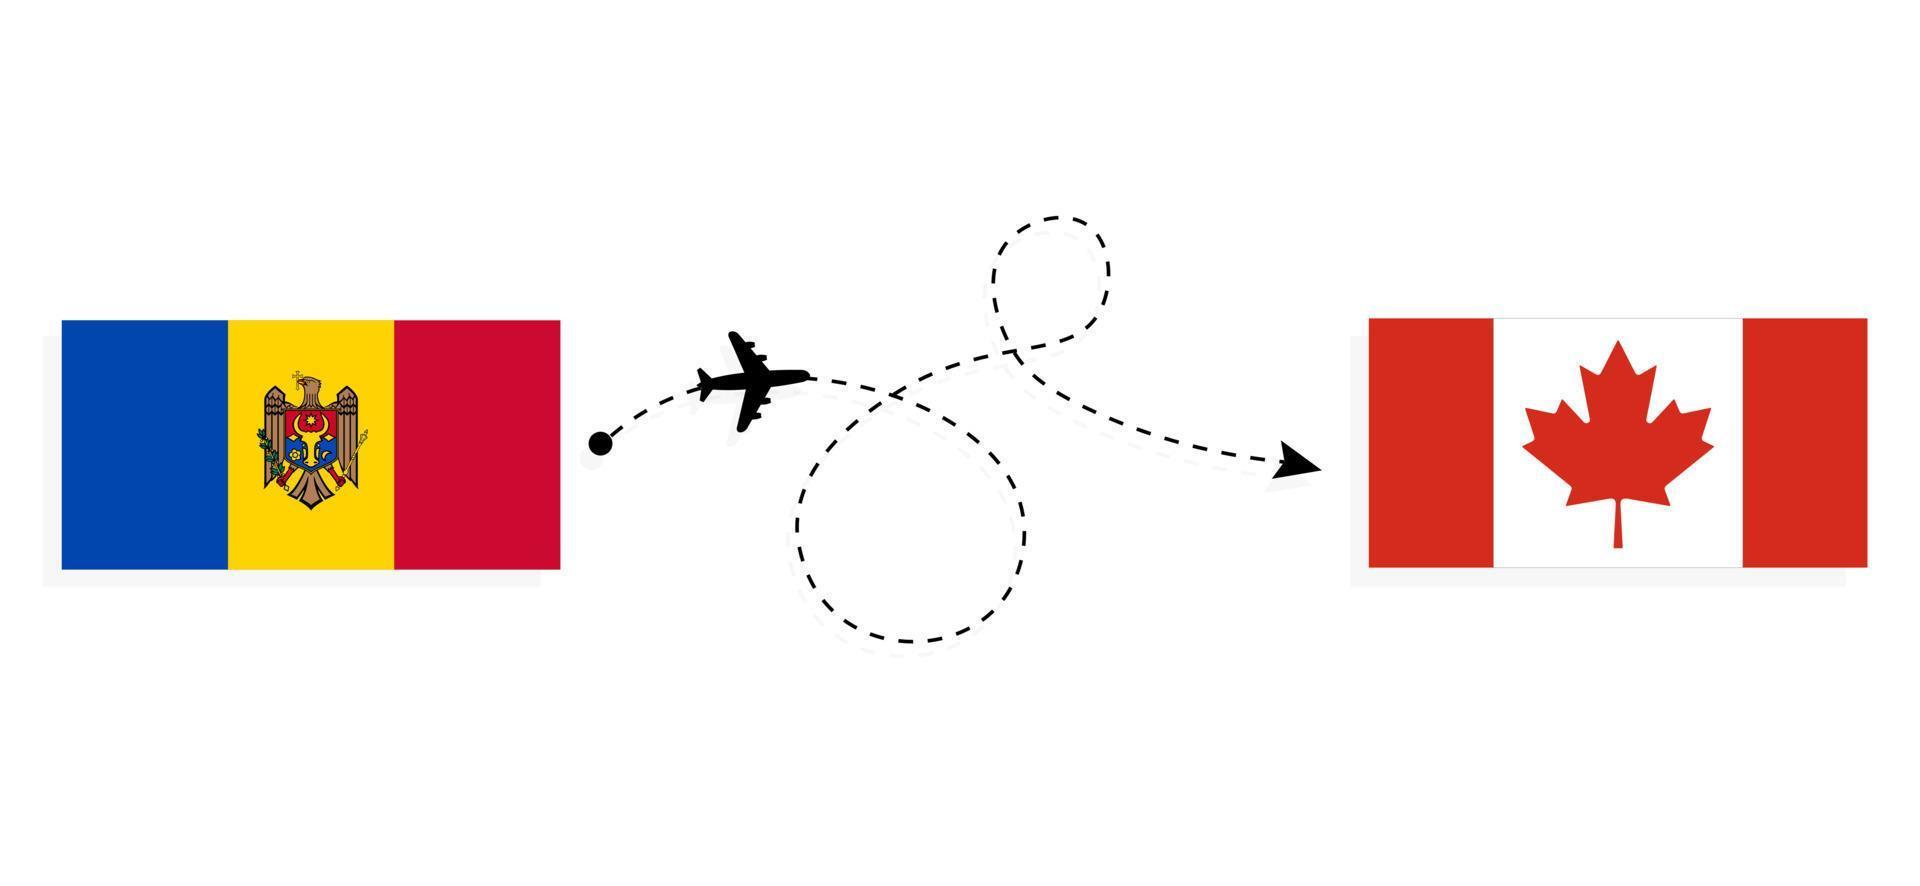 Flight and travel from Moldova to Canada by passenger airplane Travel concept vector